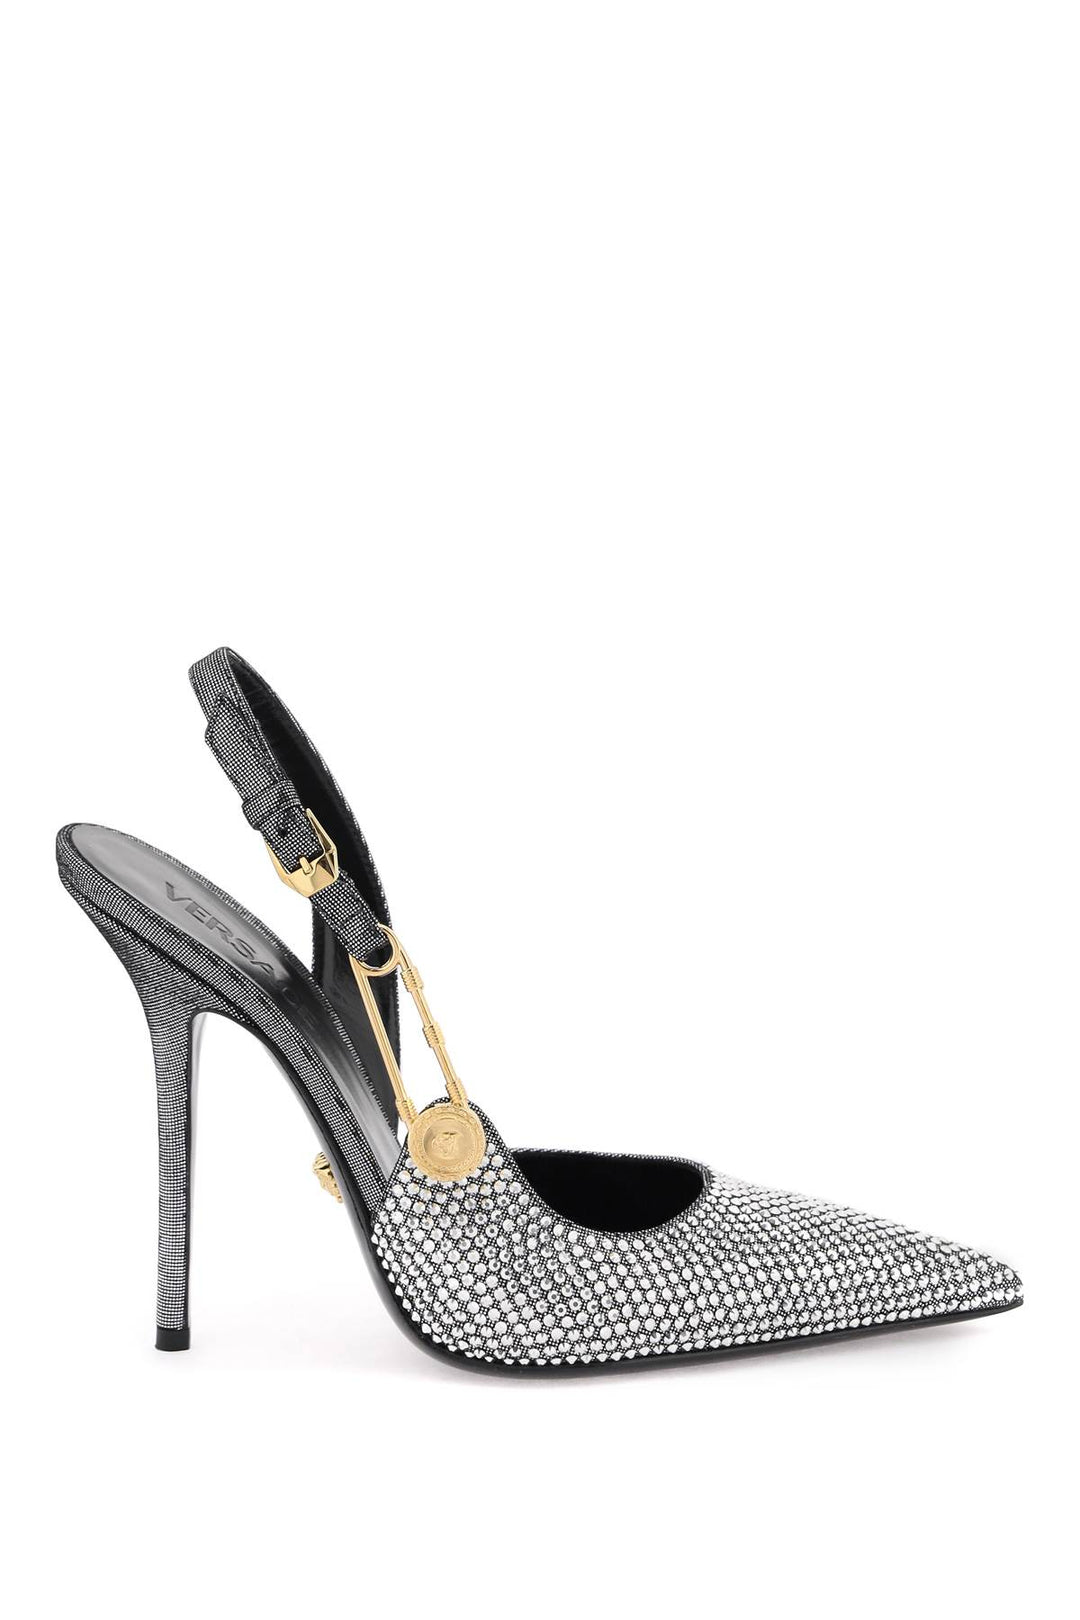 Versace 'Safety Pin' Slingback Pumps   Argento